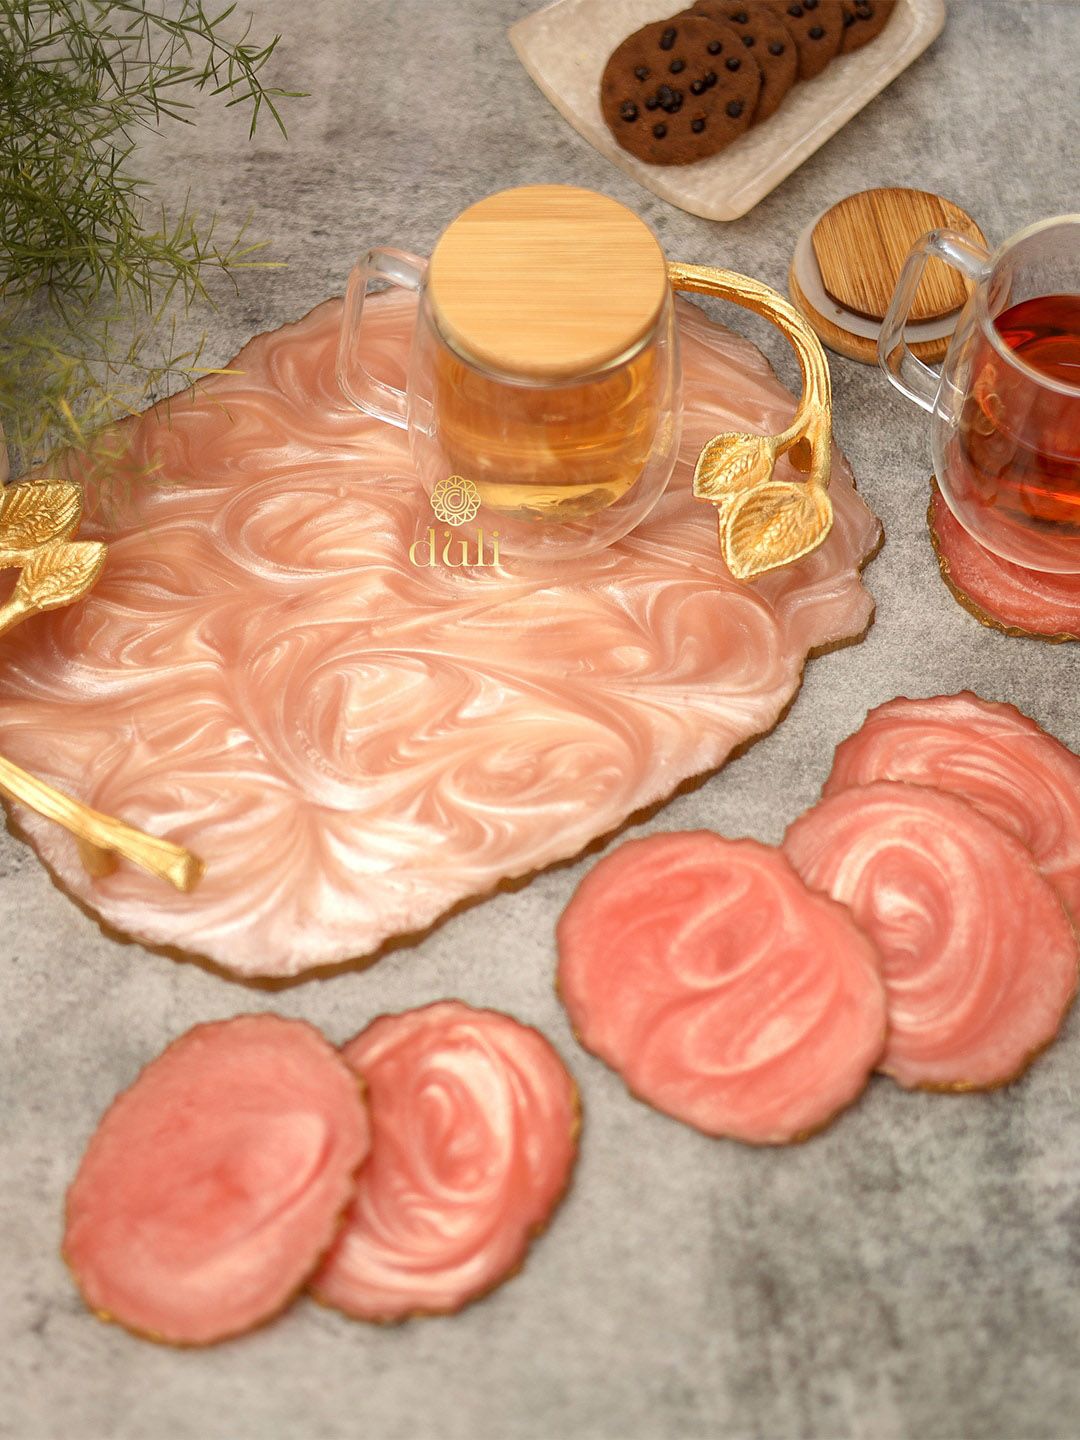 DULI Pink Resin Serving Tray Platter with 6 Pcs Oval Coasters Price in India